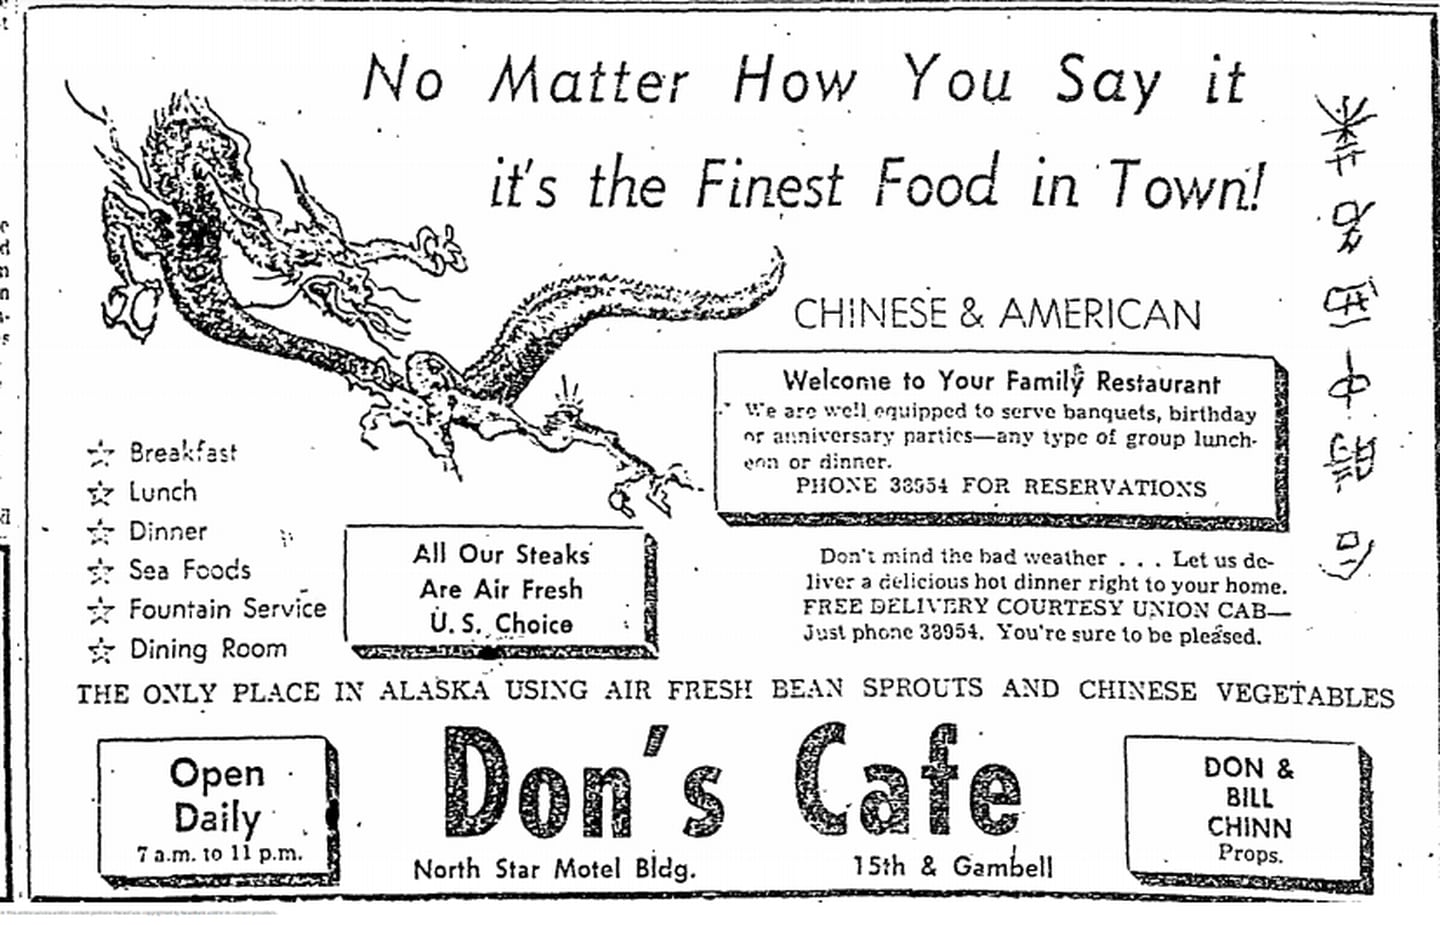 1956 advertisement for Don's Cafe in the Anchorage Daily Times.